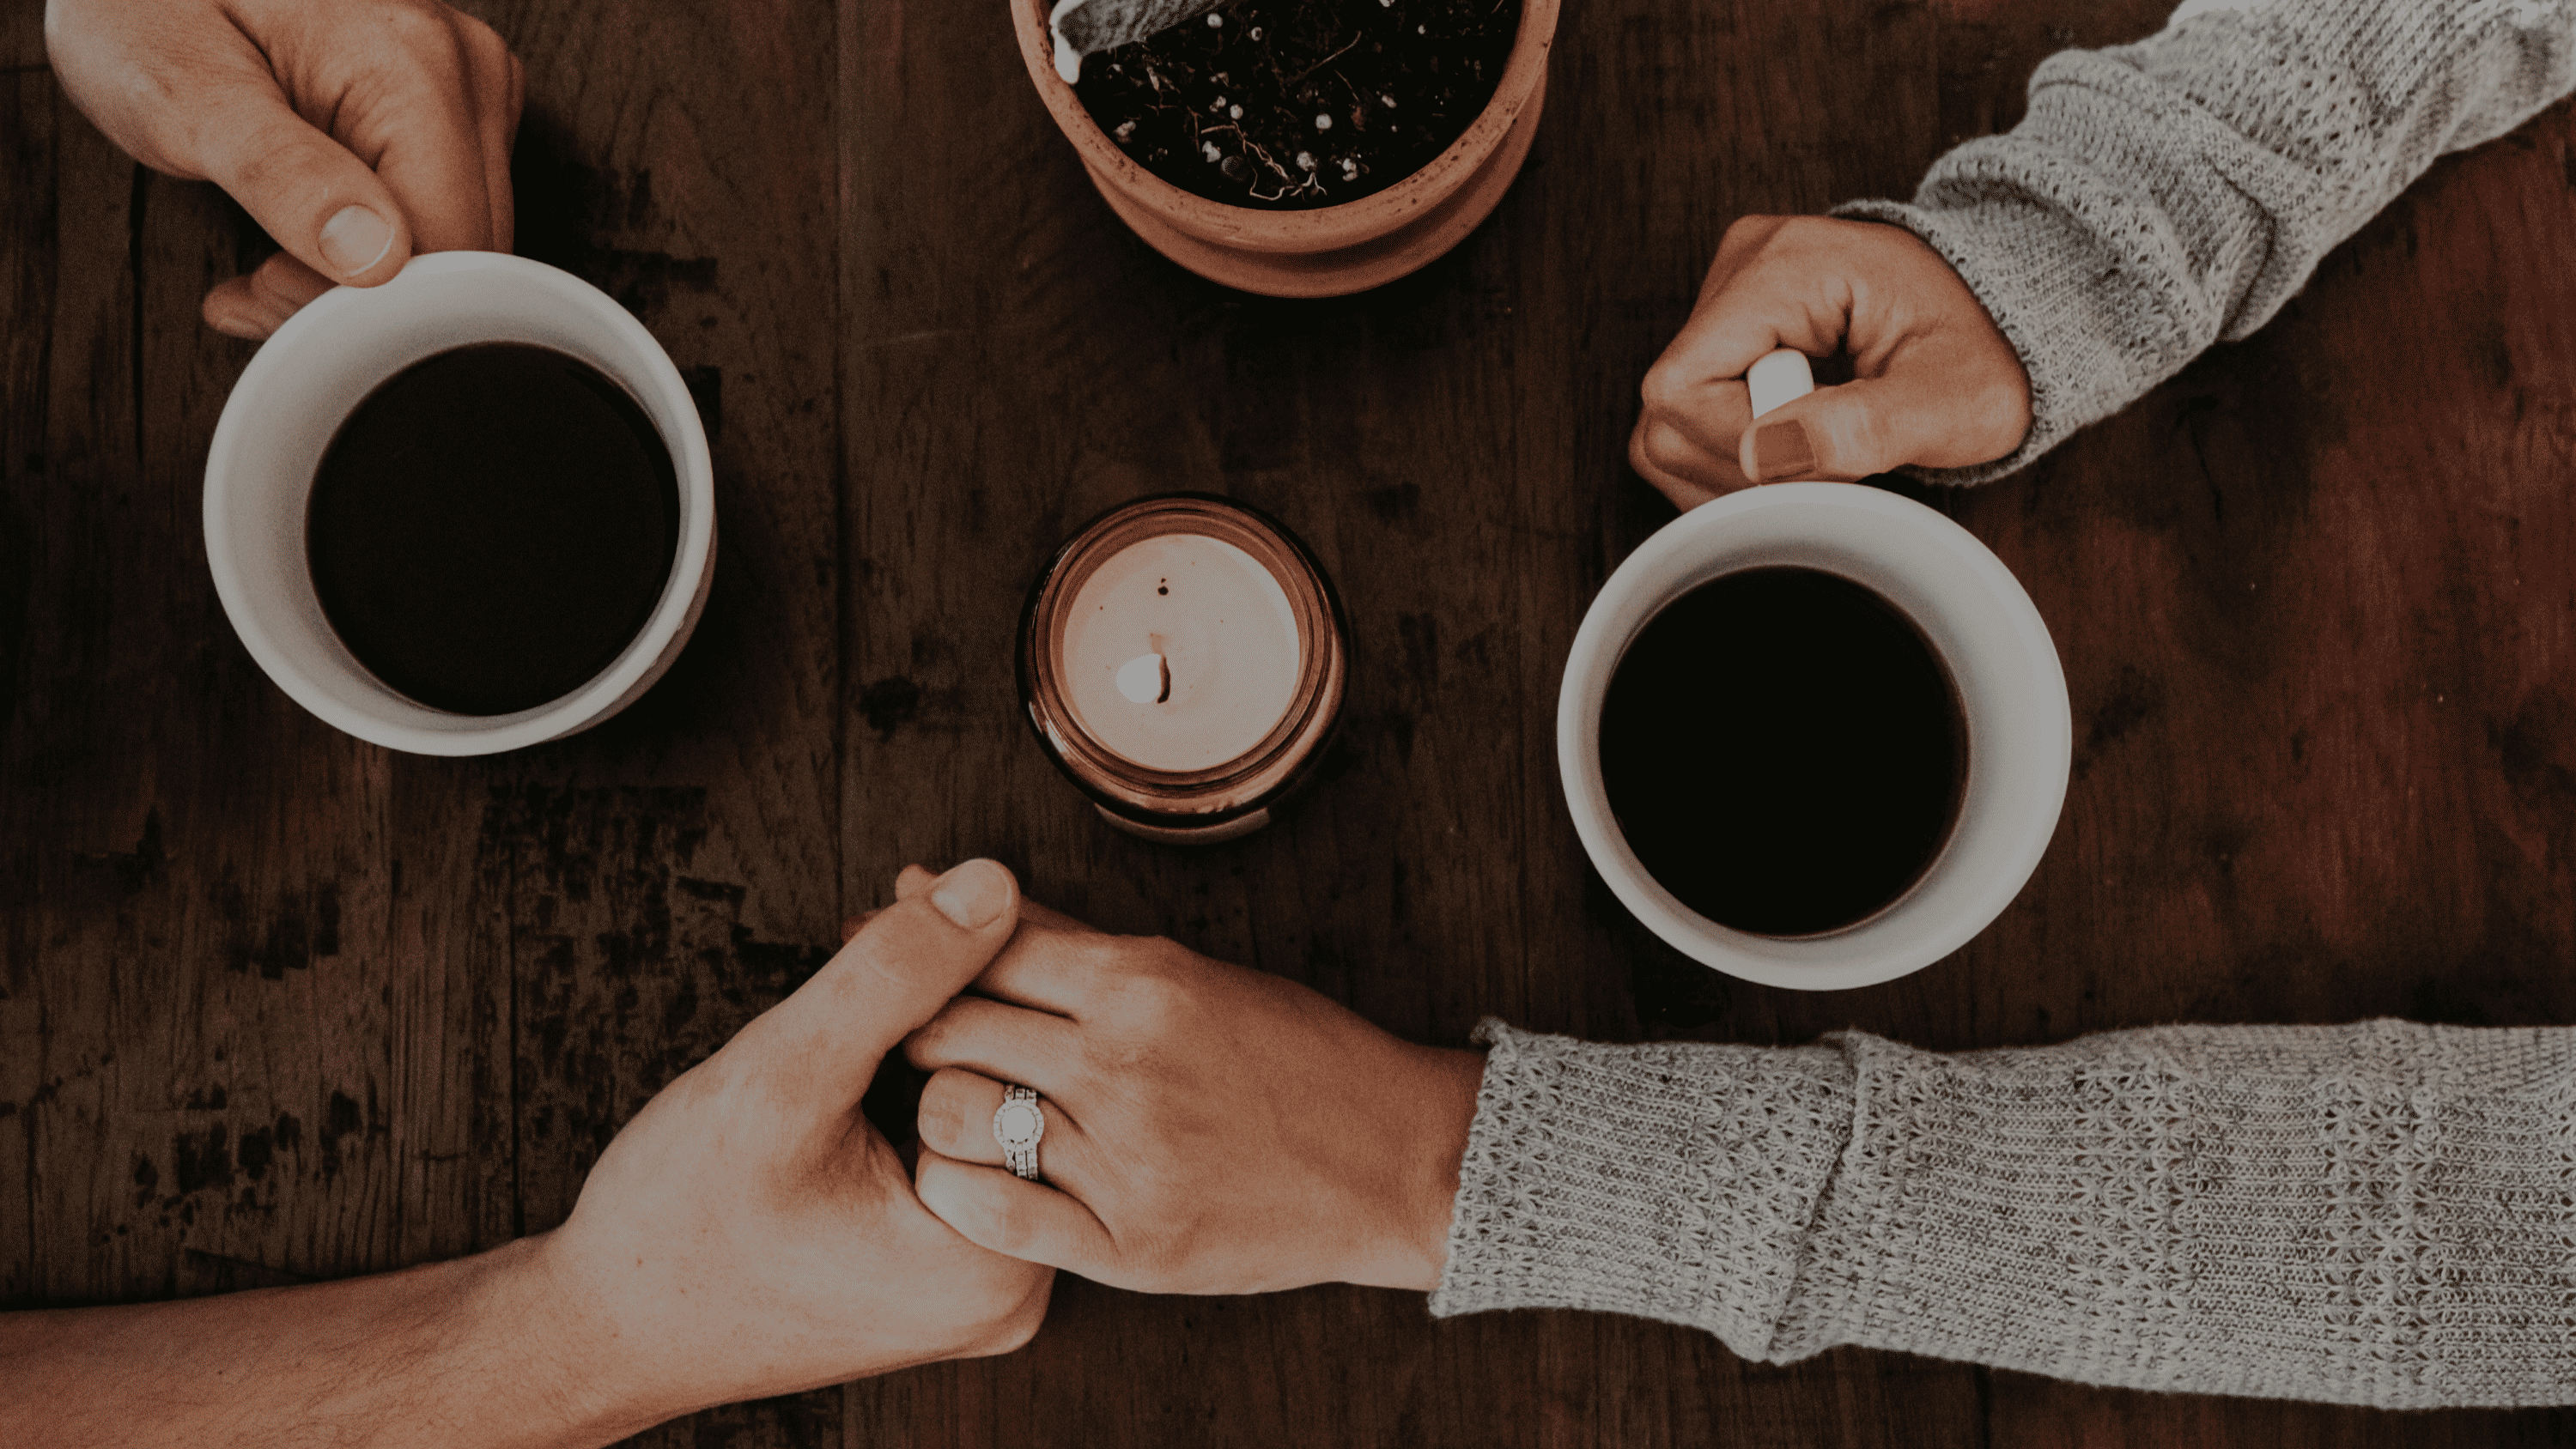 A man and woman hold hands and share coffee